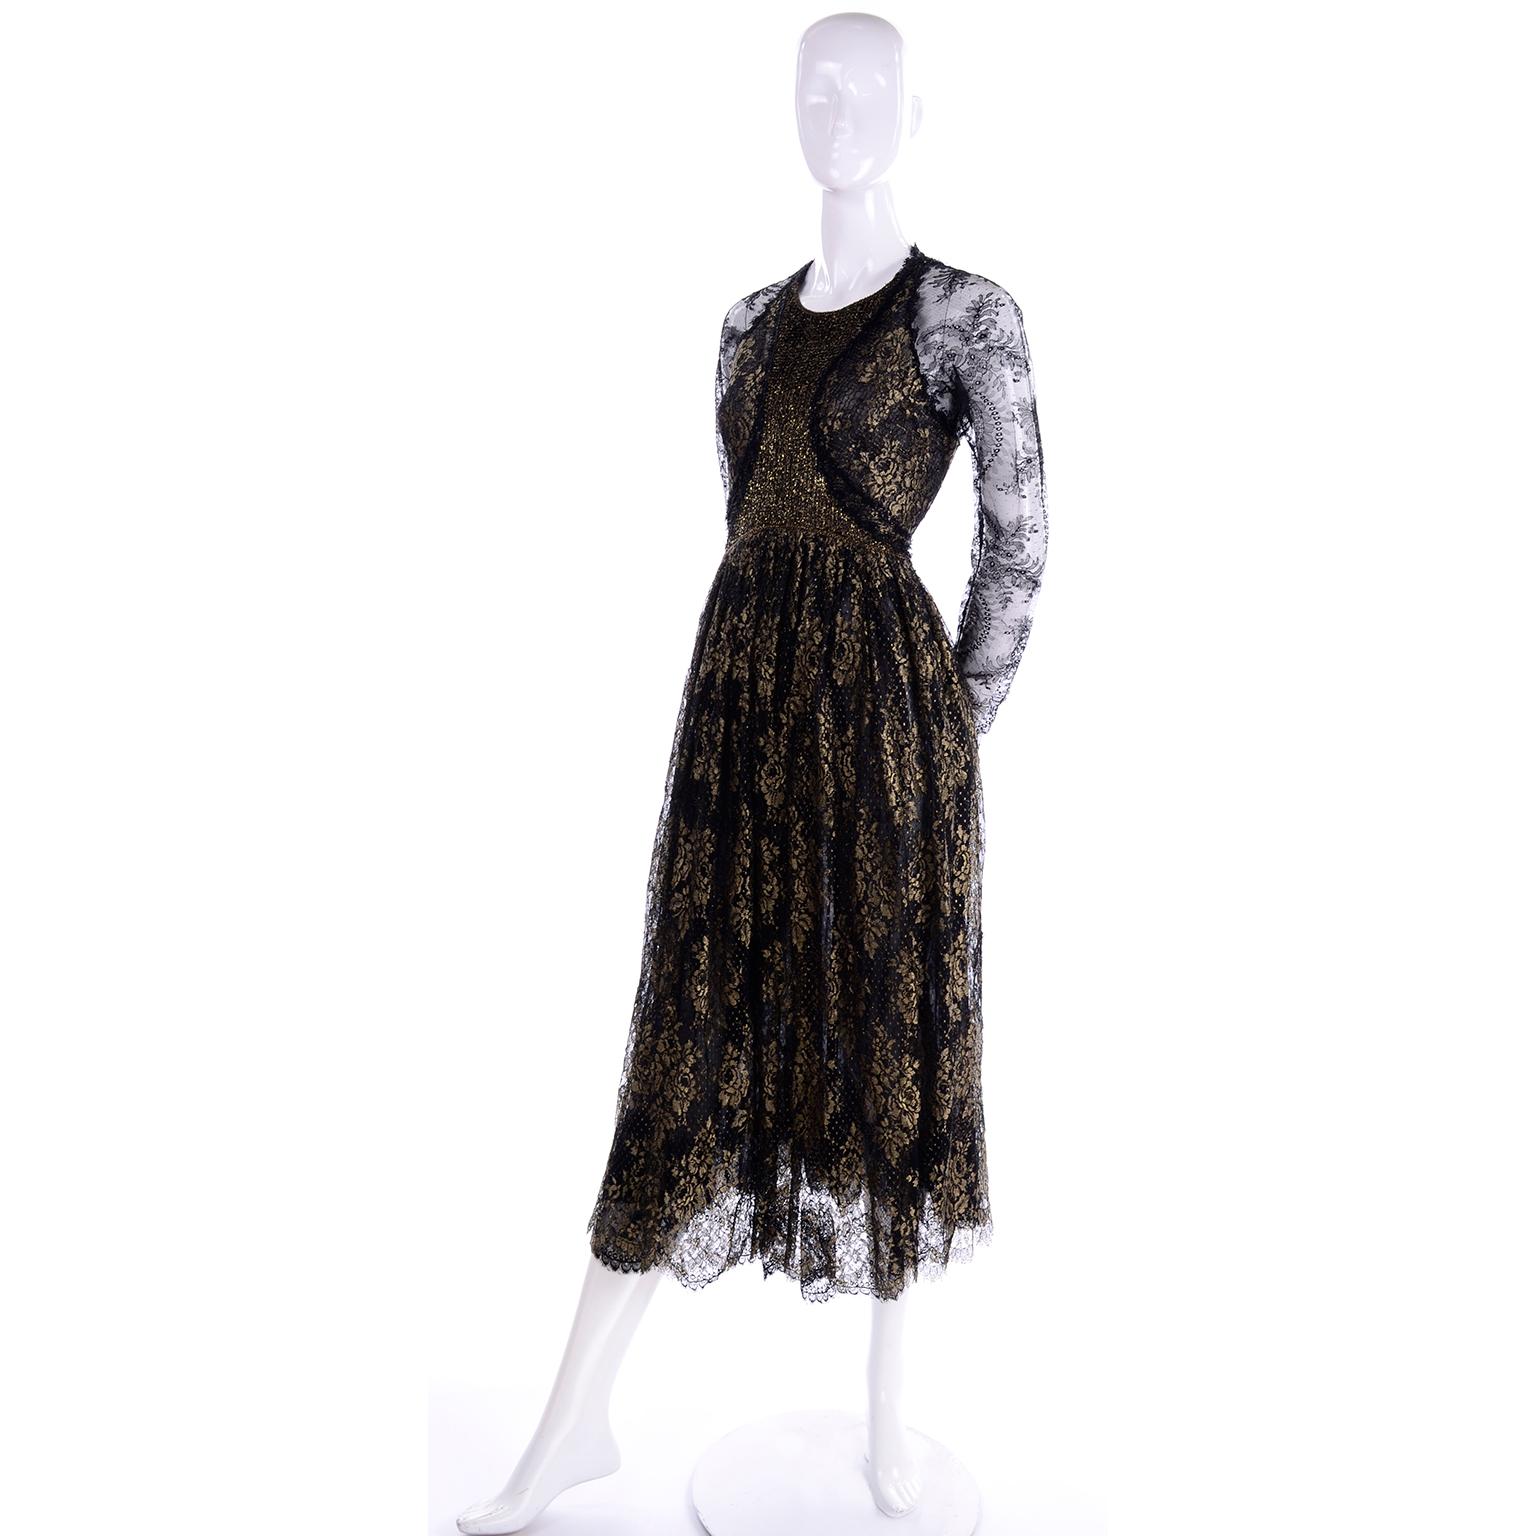 This is an outstanding early 1990's vintage Geoffrey Beene sheer black and gold metallic lace dress with a layered lace skirt. This rare dress is in a gorgeous black lace woven with gold metallic flowers, and the hemline is scalloped. This dress is